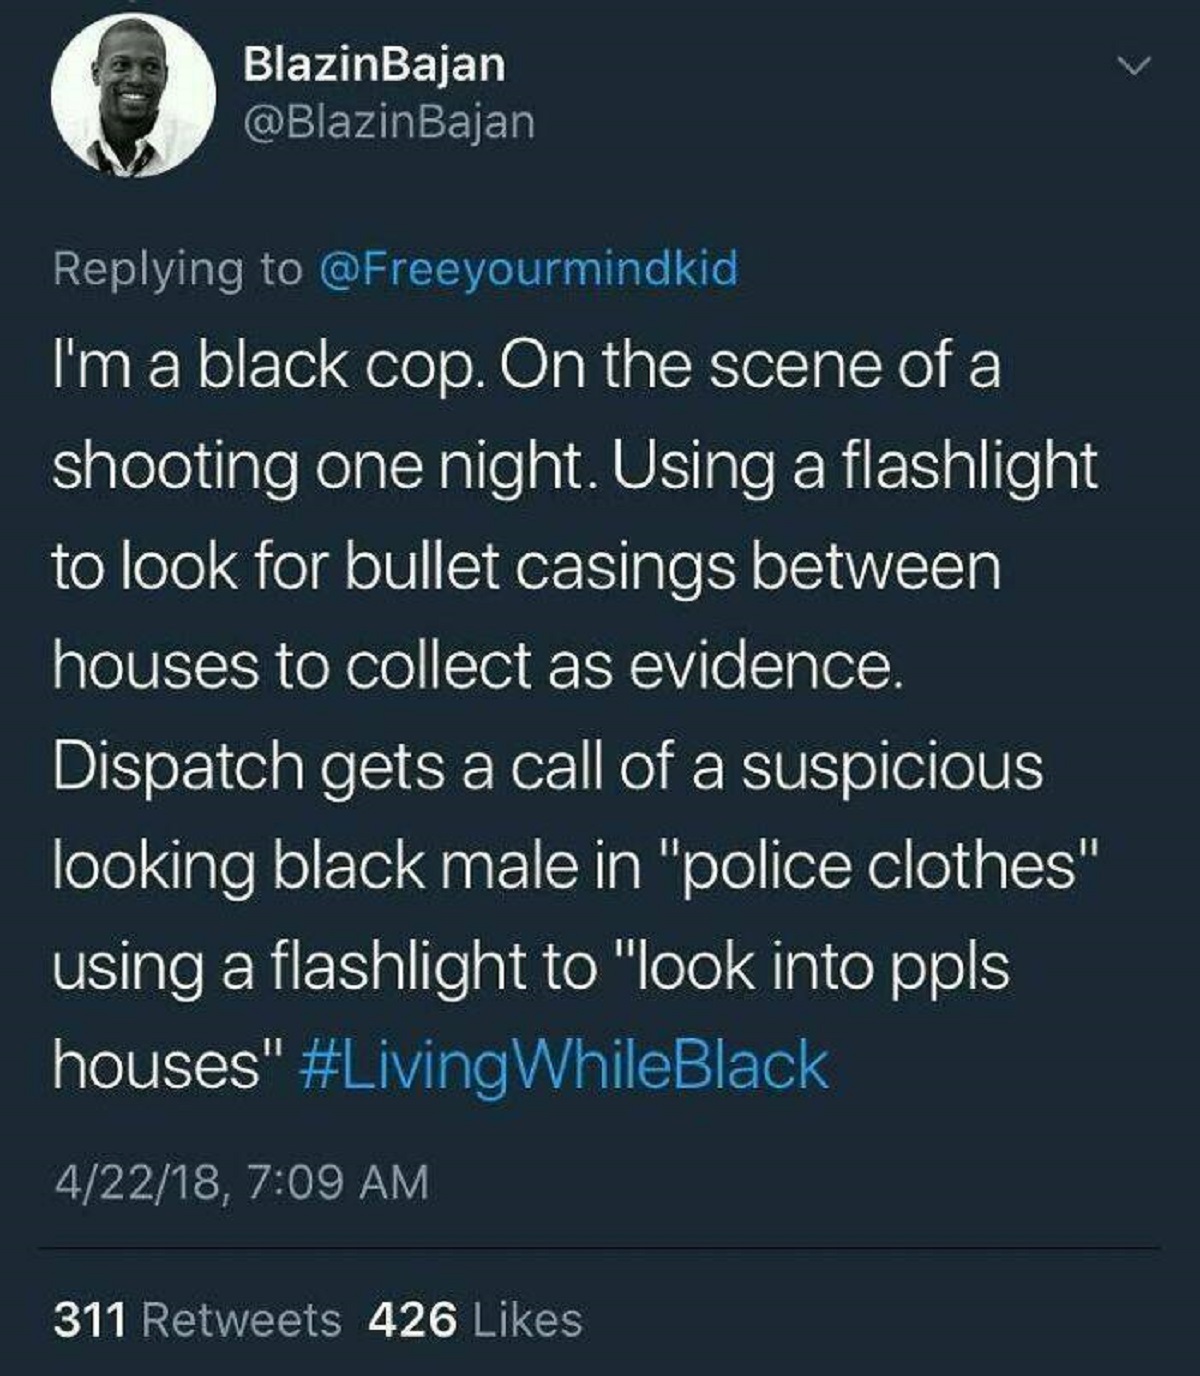 screenshot - BlazinBajan I'm a black cop. On the scene of a shooting one night. Using a flashlight to look for bullet casings between houses to collect as evidence. Dispatch gets a call of a suspicious looking black male in "police clothes" using a flashl